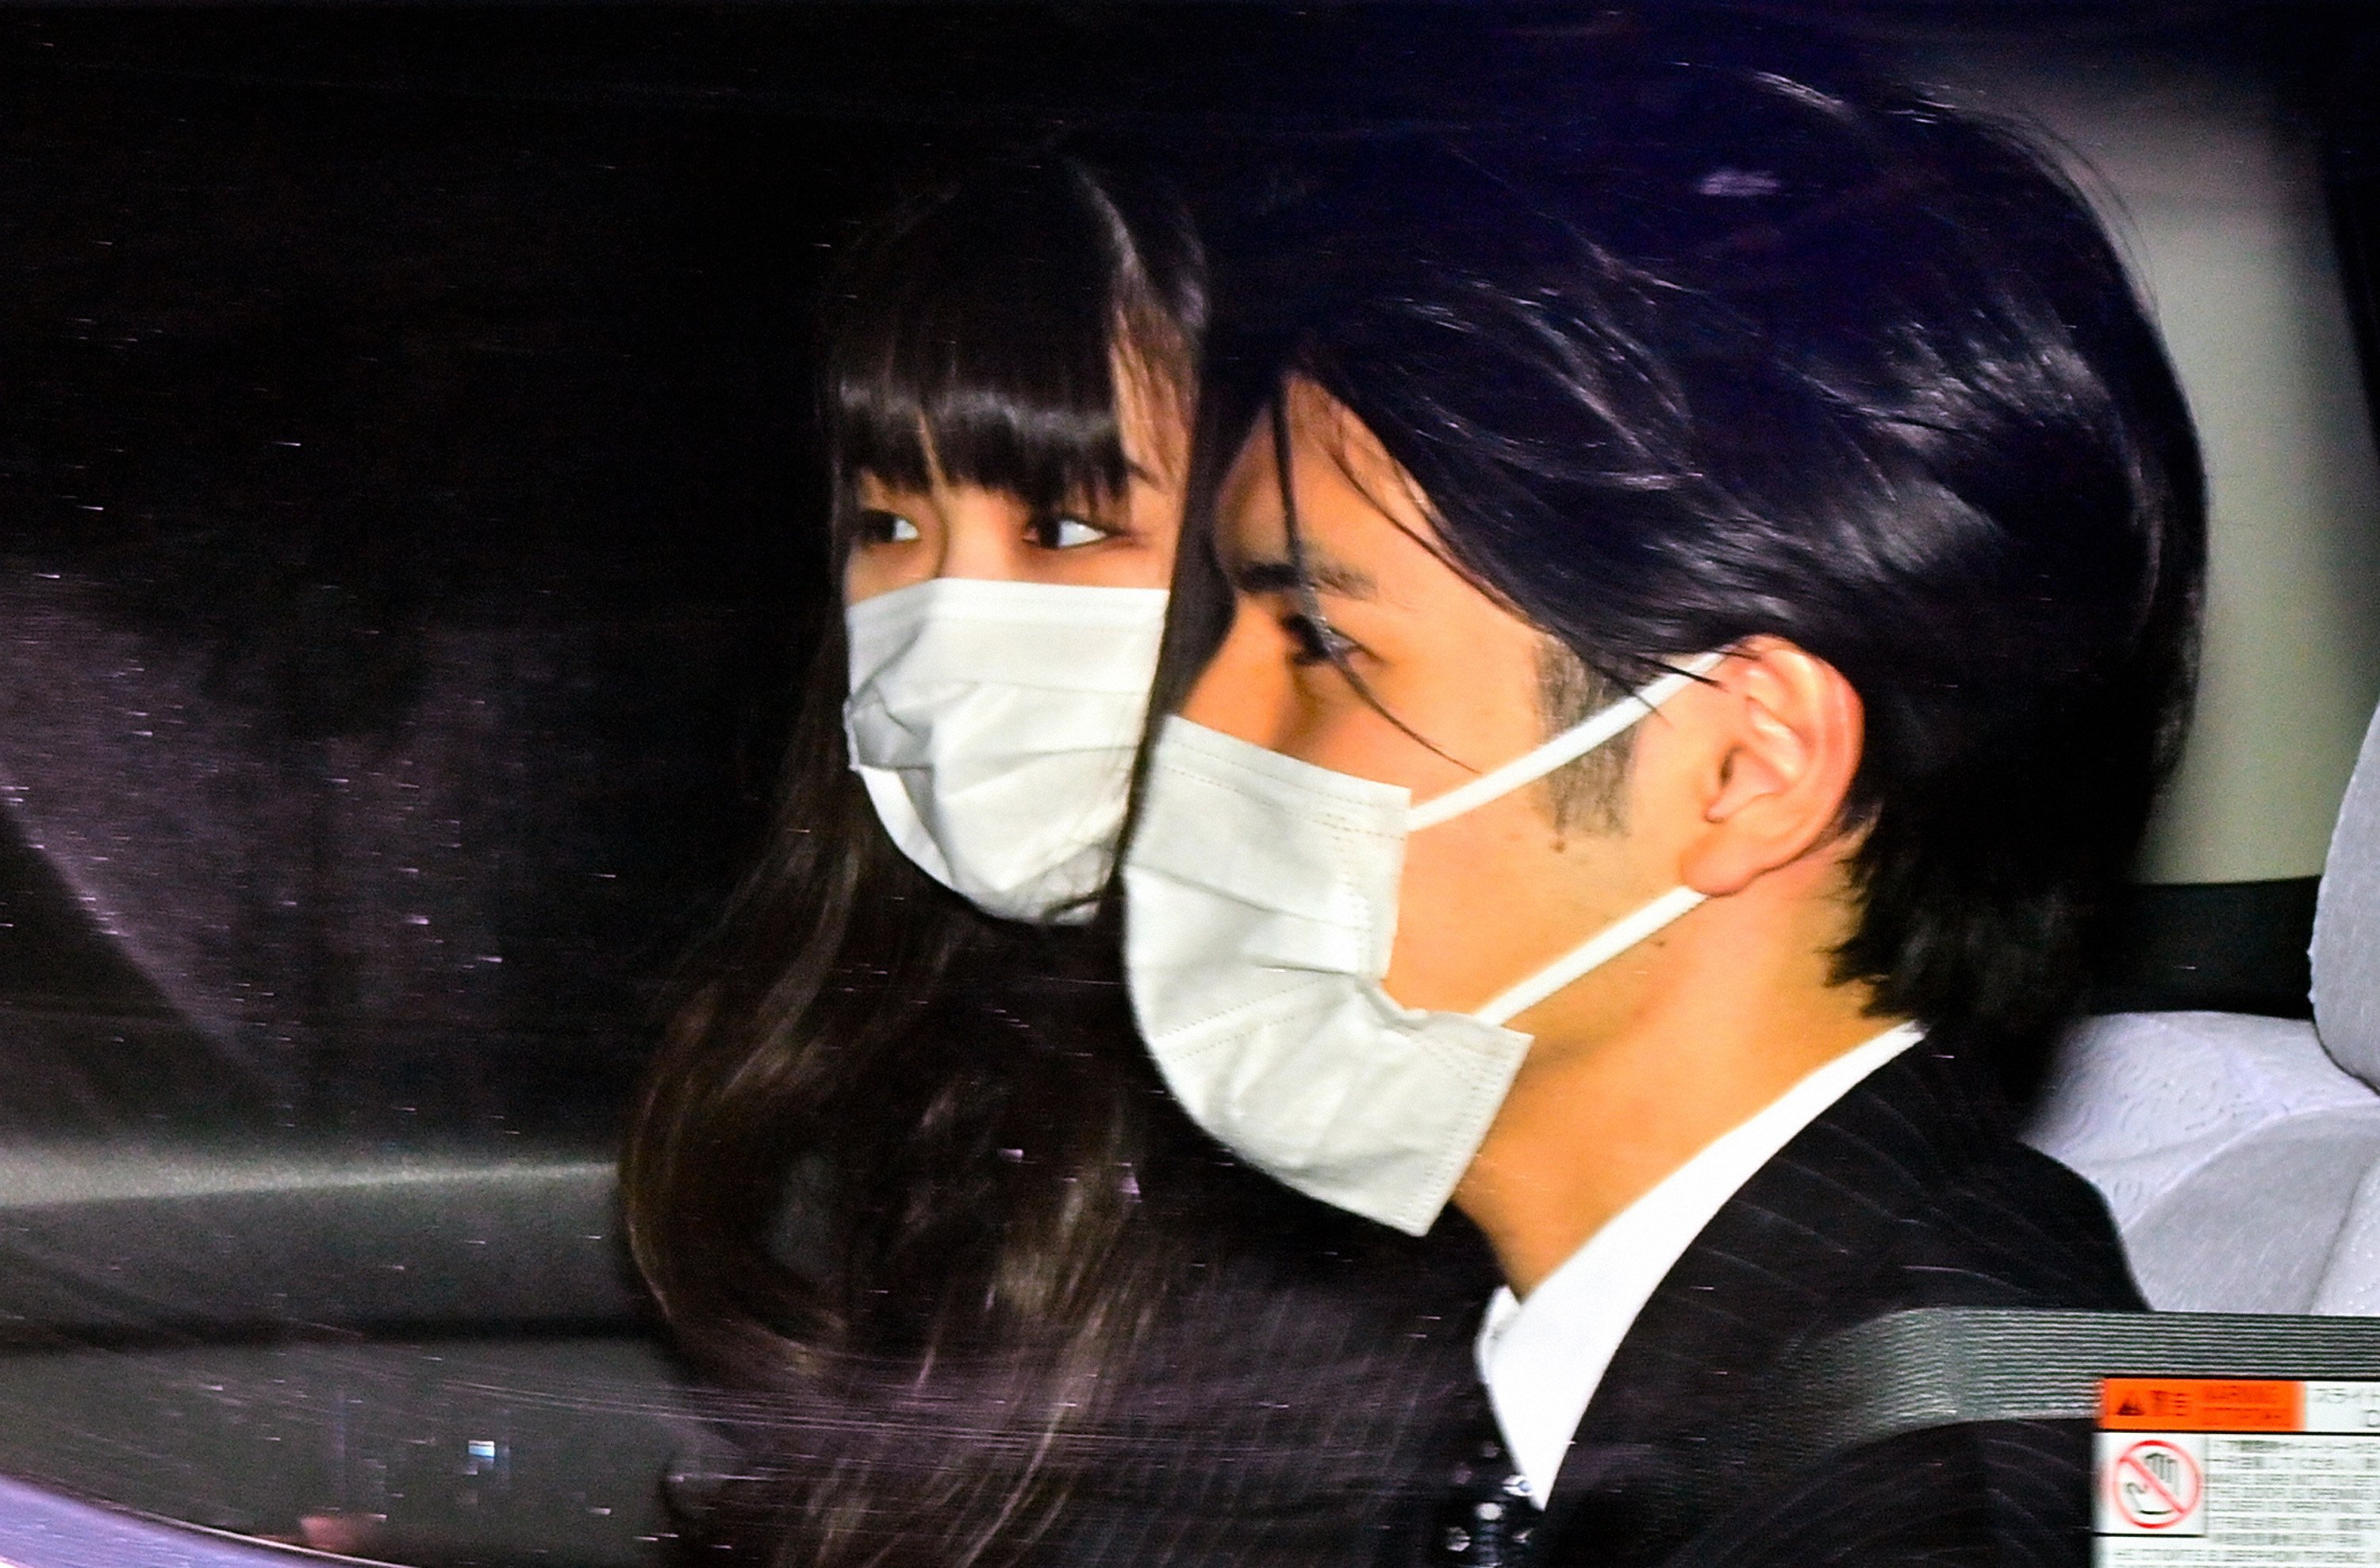 Princess Mako of Akishino, and Kei Komuro (R) are seen as they leave the hotel after a press conference on October 26, 2021 in Tokyo, Japan | Source: Getty Images